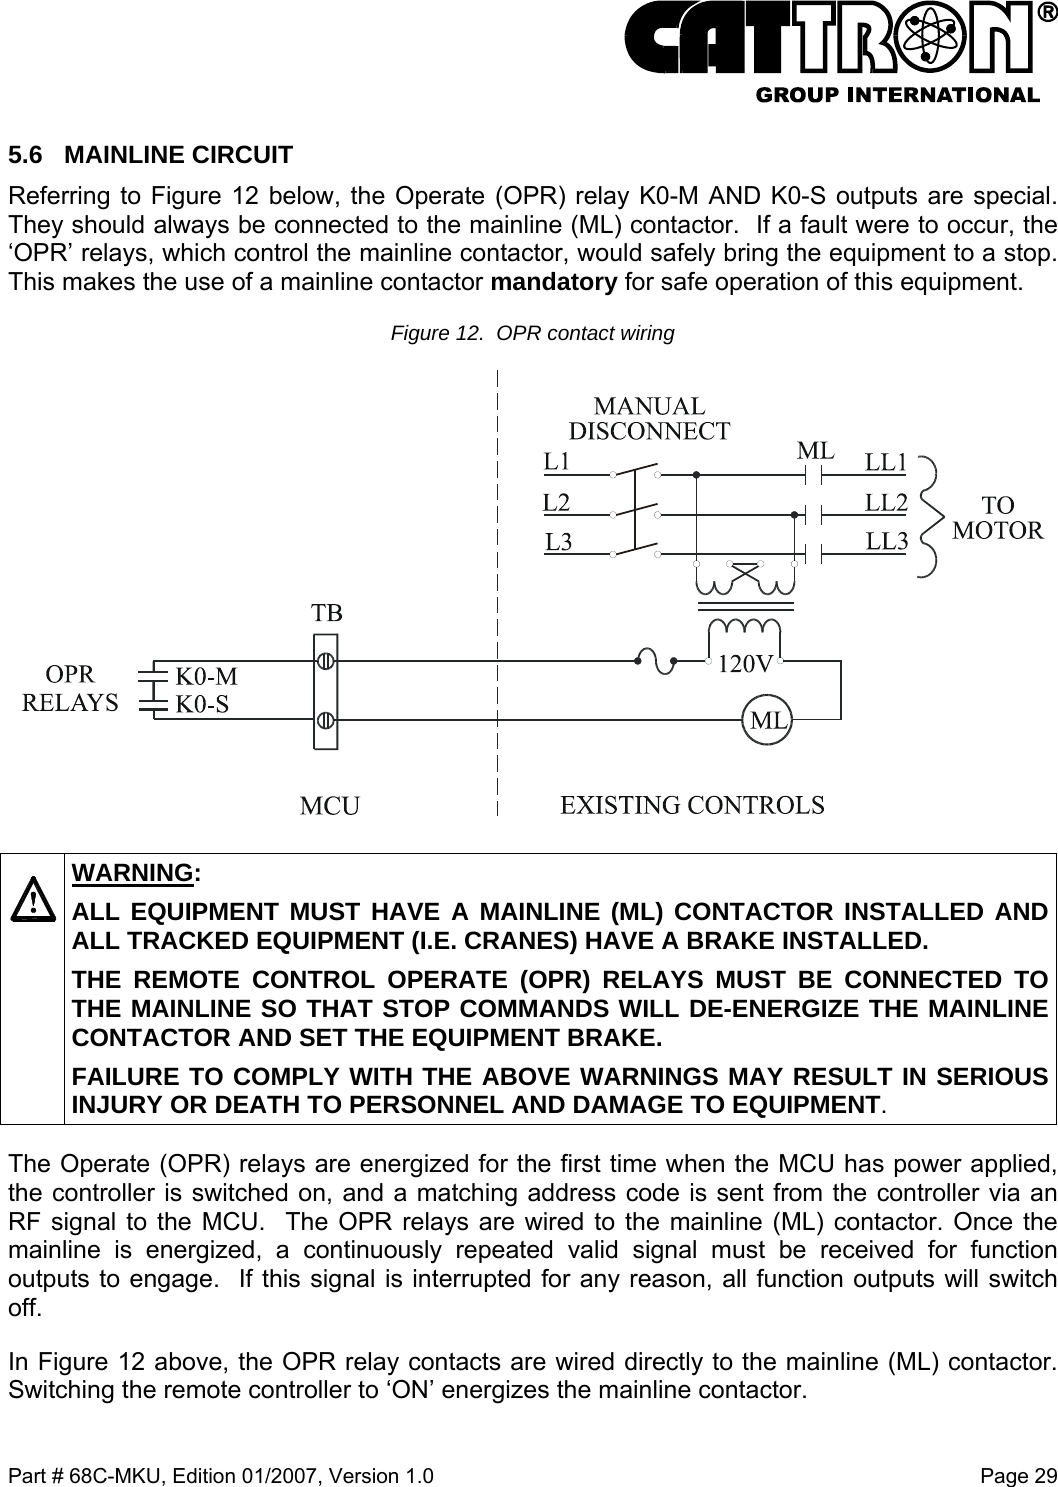  Part # 68C-MKU, Edition 01/2007, Version 1.0  Page 29   5.6 MAINLINE CIRCUIT Referring to Figure 12 below, the Operate (OPR) relay K0-M AND K0-S outputs are special. They should always be connected to the mainline (ML) contactor.  If a fault were to occur, the ‘OPR’ relays, which control the mainline contactor, would safely bring the equipment to a stop. This makes the use of a mainline contactor mandatory for safe operation of this equipment. Figure 12.  OPR contact wiring      WARNING: ALL EQUIPMENT MUST HAVE A MAINLINE (ML) CONTACTOR INSTALLED AND ALL TRACKED EQUIPMENT (I.E. CRANES) HAVE A BRAKE INSTALLED. THE REMOTE CONTROL OPERATE (OPR) RELAYS MUST BE CONNECTED TO THE MAINLINE SO THAT STOP COMMANDS WILL DE-ENERGIZE THE MAINLINE CONTACTOR AND SET THE EQUIPMENT BRAKE.  FAILURE TO COMPLY WITH THE ABOVE WARNINGS MAY RESULT IN SERIOUS INJURY OR DEATH TO PERSONNEL AND DAMAGE TO EQUIPMENT. The Operate (OPR) relays are energized for the first time when the MCU has power applied, the controller is switched on, and a matching address code is sent from the controller via an RF signal to the MCU.  The OPR relays are wired to the mainline (ML) contactor. Once the mainline is energized, a continuously repeated valid signal must be received for function outputs to engage.  If this signal is interrupted for any reason, all function outputs will switch off. In Figure 12 above, the OPR relay contacts are wired directly to the mainline (ML) contactor. Switching the remote controller to ‘ON’ energizes the mainline contactor. 